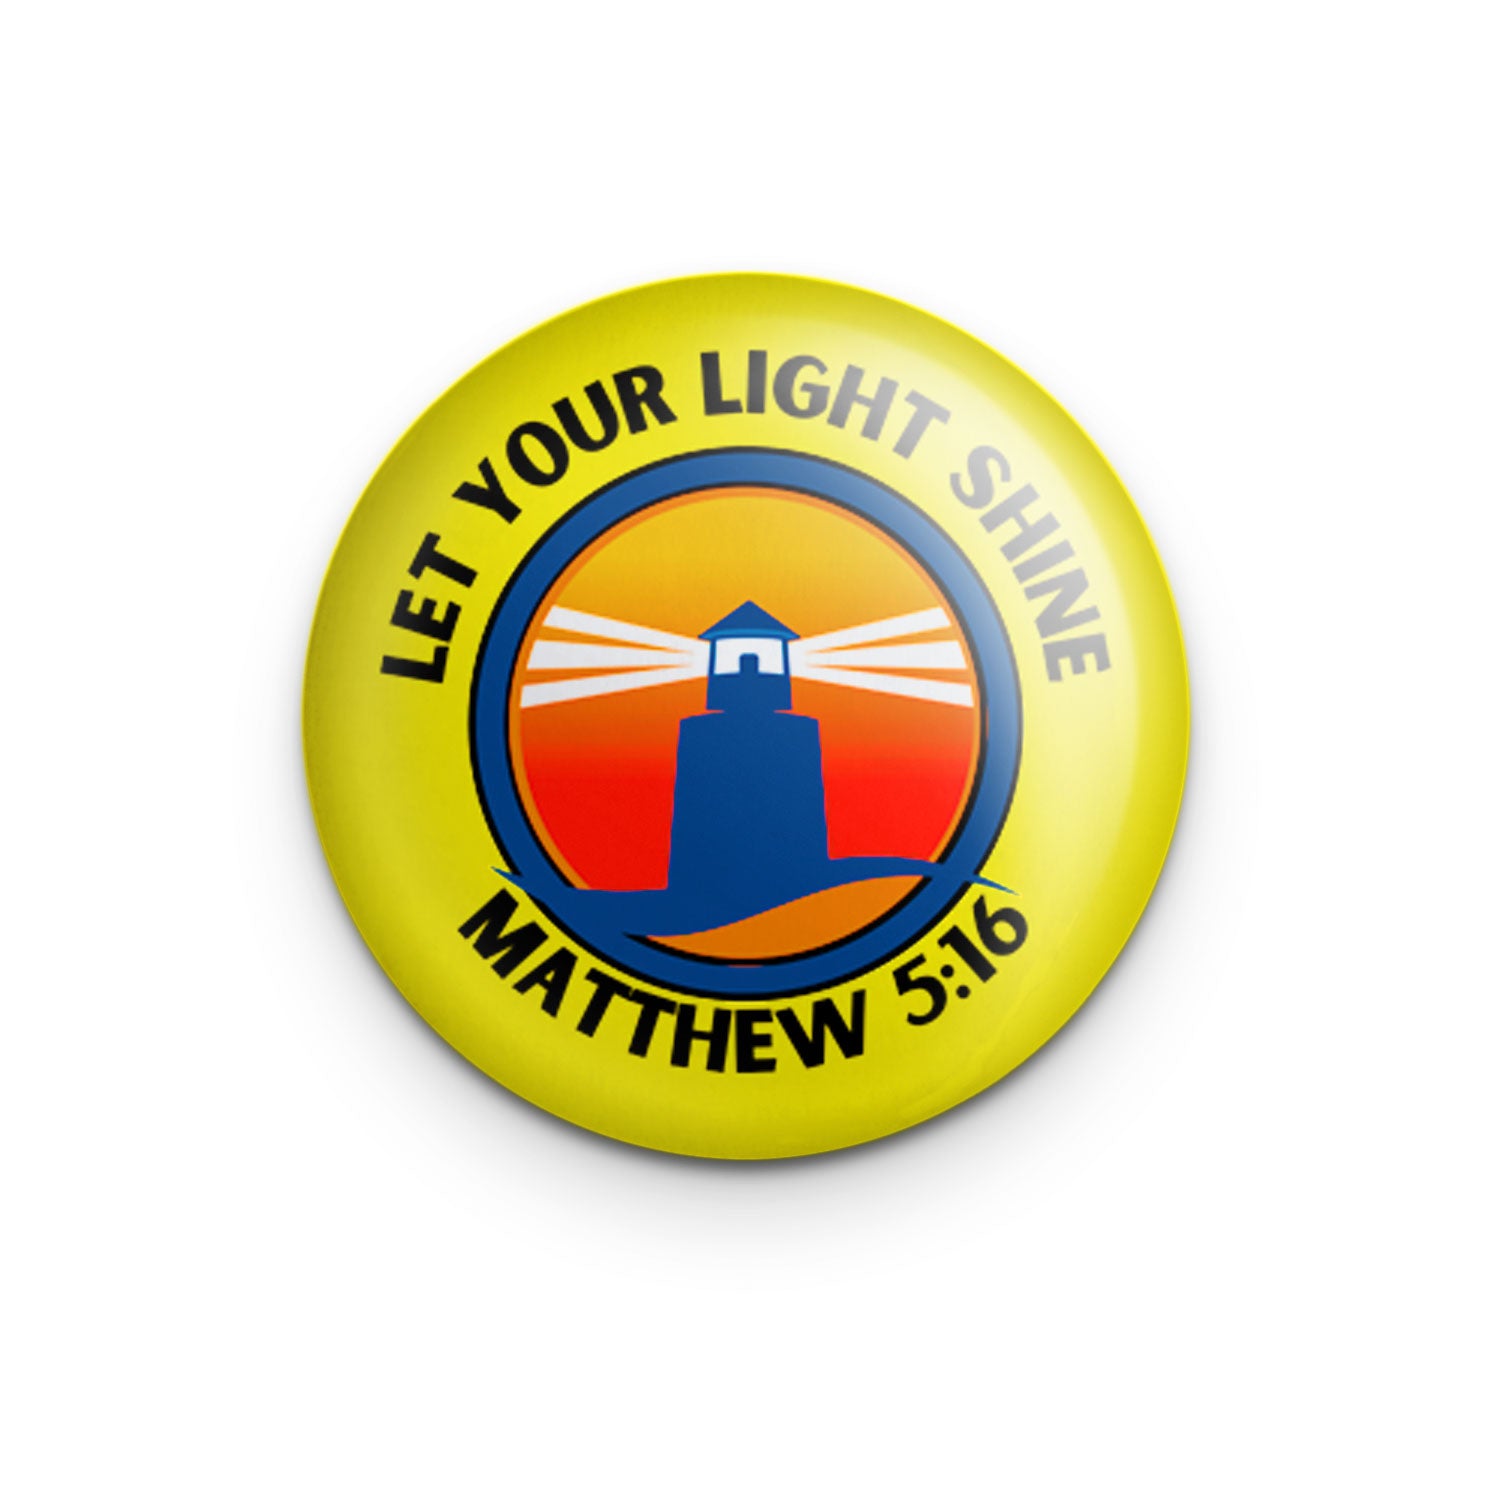 "Let Your Light Shine" - 1" Round Pinback Button